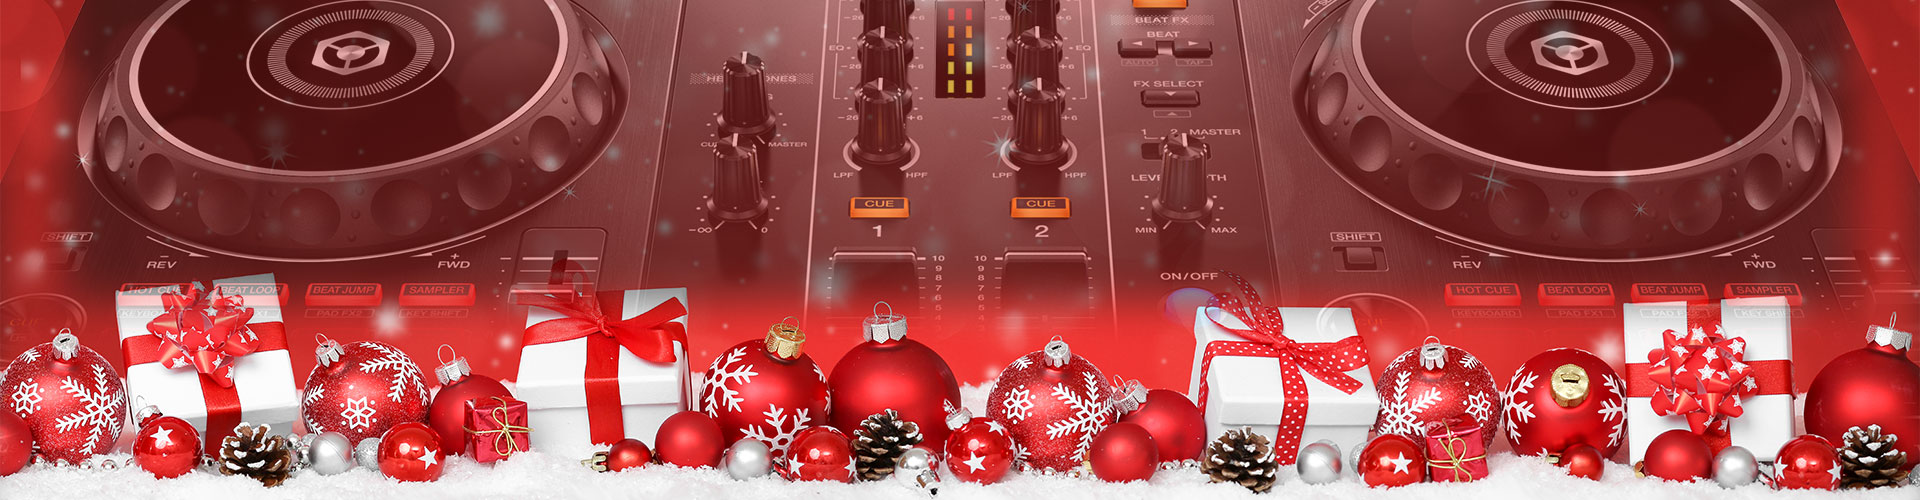 Gift Ideas for DJs and Producers